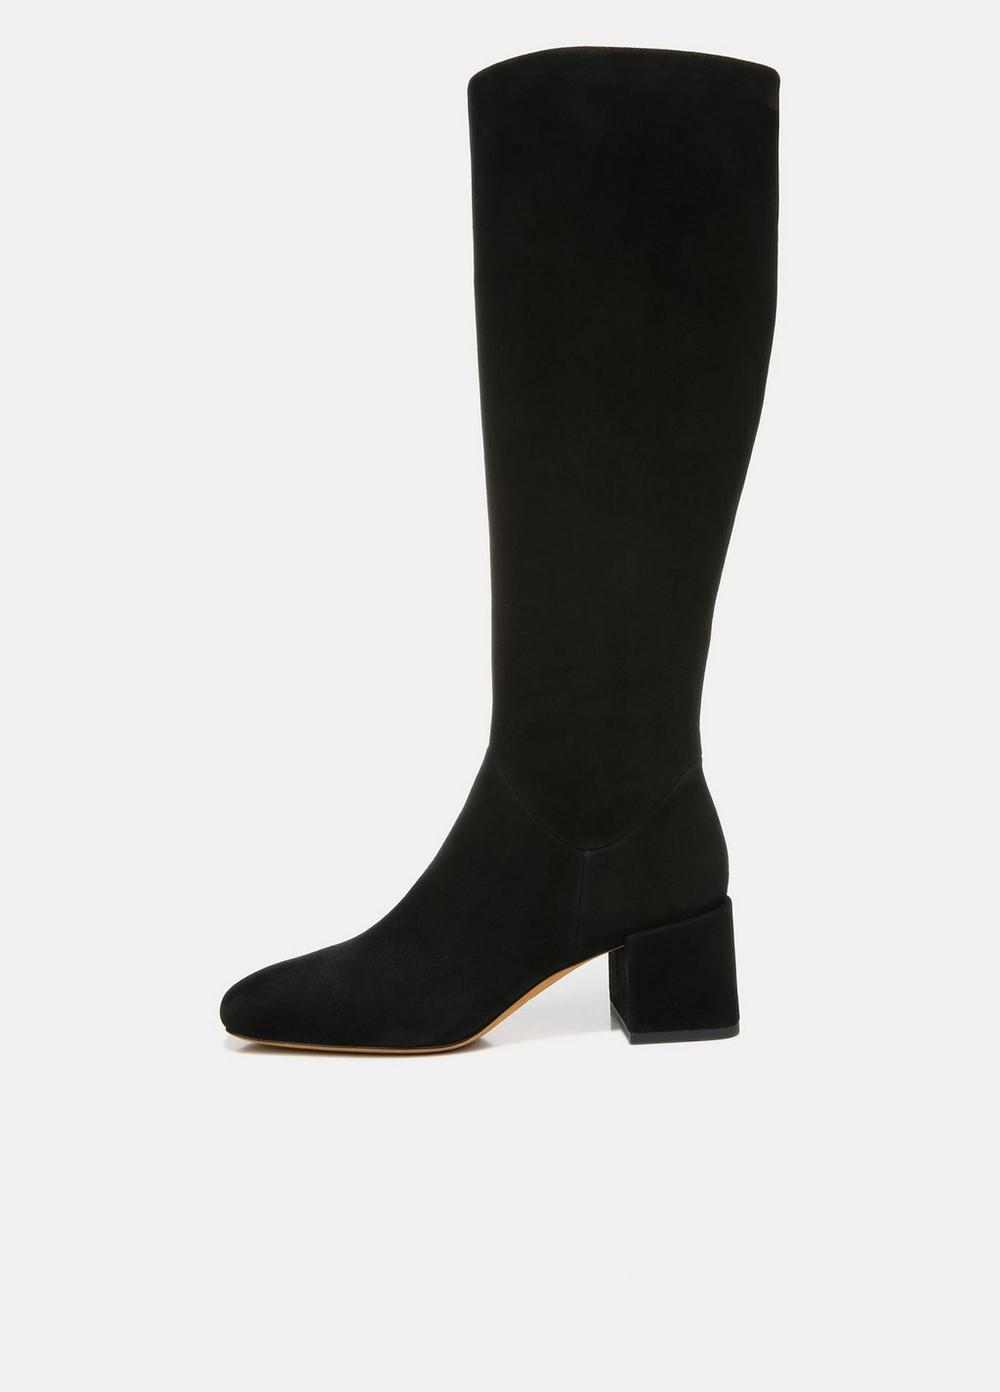 Kendra Suede Boot